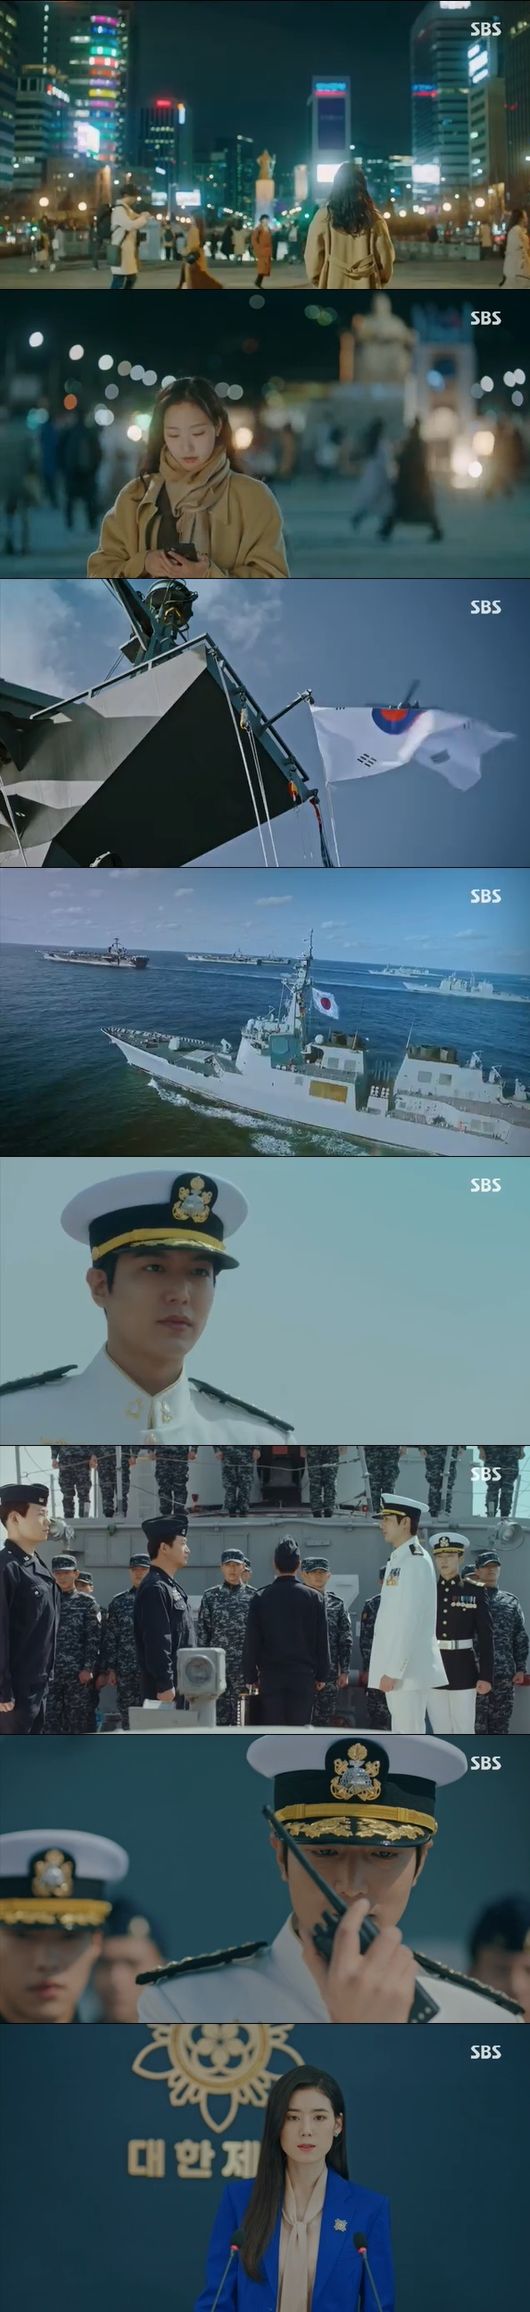 The King Lee Min-ho and Kim Go-eun reunitedIn SBSs The King: The Lord of Eternity, which was broadcast on the afternoon of the 2nd, Lee Min-ho and Kim Go-eun were shown to part ways for a while.Emperor Leeon found out that Jung Tae-eul could not come to Busan because he did not have a car, and he turned the helicopter to Seoul and met two people.The Prime Minister of the Guseo-ryeong (Jung Eun-chae) heard reports that the emperors helicopter had been granted emergency landing permits, and the three first met.Im in trouble, of course, Im going to report it, said Lee. Where is the service in the day? He said, Your Majesty is my country.Korean Empire Prime Minister is a written book, he said.Jung Tae-eul said, Prime Minister fan, and Koo Seo-ryong asked, I am so young and beautiful.I am a traveler, and I am honored to see you like this, and I will leave soon. Korean Empire is like a fairy tale, said Jeong Tae-eul.I am the first Korean Empire, but I am very good at my country.Later, Igon moved with Jung Tae-eul, and Guseo-ryeong felt a lot of jealousy. Guseo-ryeong recalled Lee, who laughed brightly at the moment, saying, I laugh because of you, and you laugh at that moment.Lee and Jung Tae-eul talked while writing on each others palms in the middle of the move, and Cho Young (Woo Do-hwan) and Imperial House of Japan officials were amazed at this.Igon cooked himself for Jung Tae, and Jung Tae-eun said, I was lonely in South Korea today, and there was no way to prove that I was me.Thank you for coming to pick me up, he said.Lee said, Come here for a while, look at me. He kissed his forehead to Jung Tae-eun and smiled, I want to give you Tsudamtsudam, but I do not have a hand.Igon said of the wound on his neck, The wound that killed my father, and the desire of the person who strangled my neck was drawn to my neck, so it was big in the tears of the palace.I hope you dont feel sorry for me, he said.Jung Tae-eul said, Are you going to show me your ID card? I have to go now. Lee said, I will not send you, but I have to live here.Lee said, I was not able to give it to you if you really showed it.Jung Tae-eul said, My ID is right. But does it make sense? This is definitely mine. Ive been here for 25 years?Someone spilled it, and I dont know if my memory is getting cloudy and I can recognize it, because hes the beginning or the end of all this.It will be difficult to solve, but you are the answer I was looking for, and whoever it is, which World person will solve, do not say goodbye to yourself. Shortly afterwards, the Old Seoryeong Prime Minister called an emergency NSC (National Security Council) to Japans unimportant move.There may be a war between Korean Empire and Japan.The Old Testament Prime Minister prepared for war, and Igon said, If Japan comes out so frankly, we should be honest, too.Japan can not enter our territorial waters 1cm or 1mm. Giving Jeong Tae-eun his ID, Igon said, I dont believe it, but I am the commander-in-chief. Imperial House of Japan wears military uniforms in honorable moments, meaning to win.Will you wait? asked Jeong Tae-eul. Lets see you again, Igon.I thought it was a name I had not called, but it was a name I had only called you, he promised to meet the next meeting.Jung Tae-eul, who returned to South Korea Seoul, arrived home, and his father, Jung-in (Jeon Bae-su), said, Did you not go home? Where did you go? Did you lurk?Is Maju taking him with me? Jung Tae-eun, who returned to the detective, focused on his work and recalled Lee. He did not come for a long time, he said.I didnt know what was happening in his World; he was a person beyond it, passing between 1 and 0, he missed.Fortunately, Japan has completely stepped out of the Korean Empire territorial waters and no war has occurred, and the Prime Minister of the Old Testament has announced his official position that he respects the Emperor and wants Japans quick apology.What added to that was going to another World, said Igon, who learned that the reverse Irim (Lee Jung-jin) was alive.I have half of my food, and then he will come to find the half of me. Igon, who came to South Korea, said, How are you? Did you wait?Jung Tae-eun, who was tearful, ran to Lee, and Lee said, The concern of the road is wrong. It is not dangerous to me, but I am dangerous to Jung Tae-eun.Capture the broadcast screen of The King